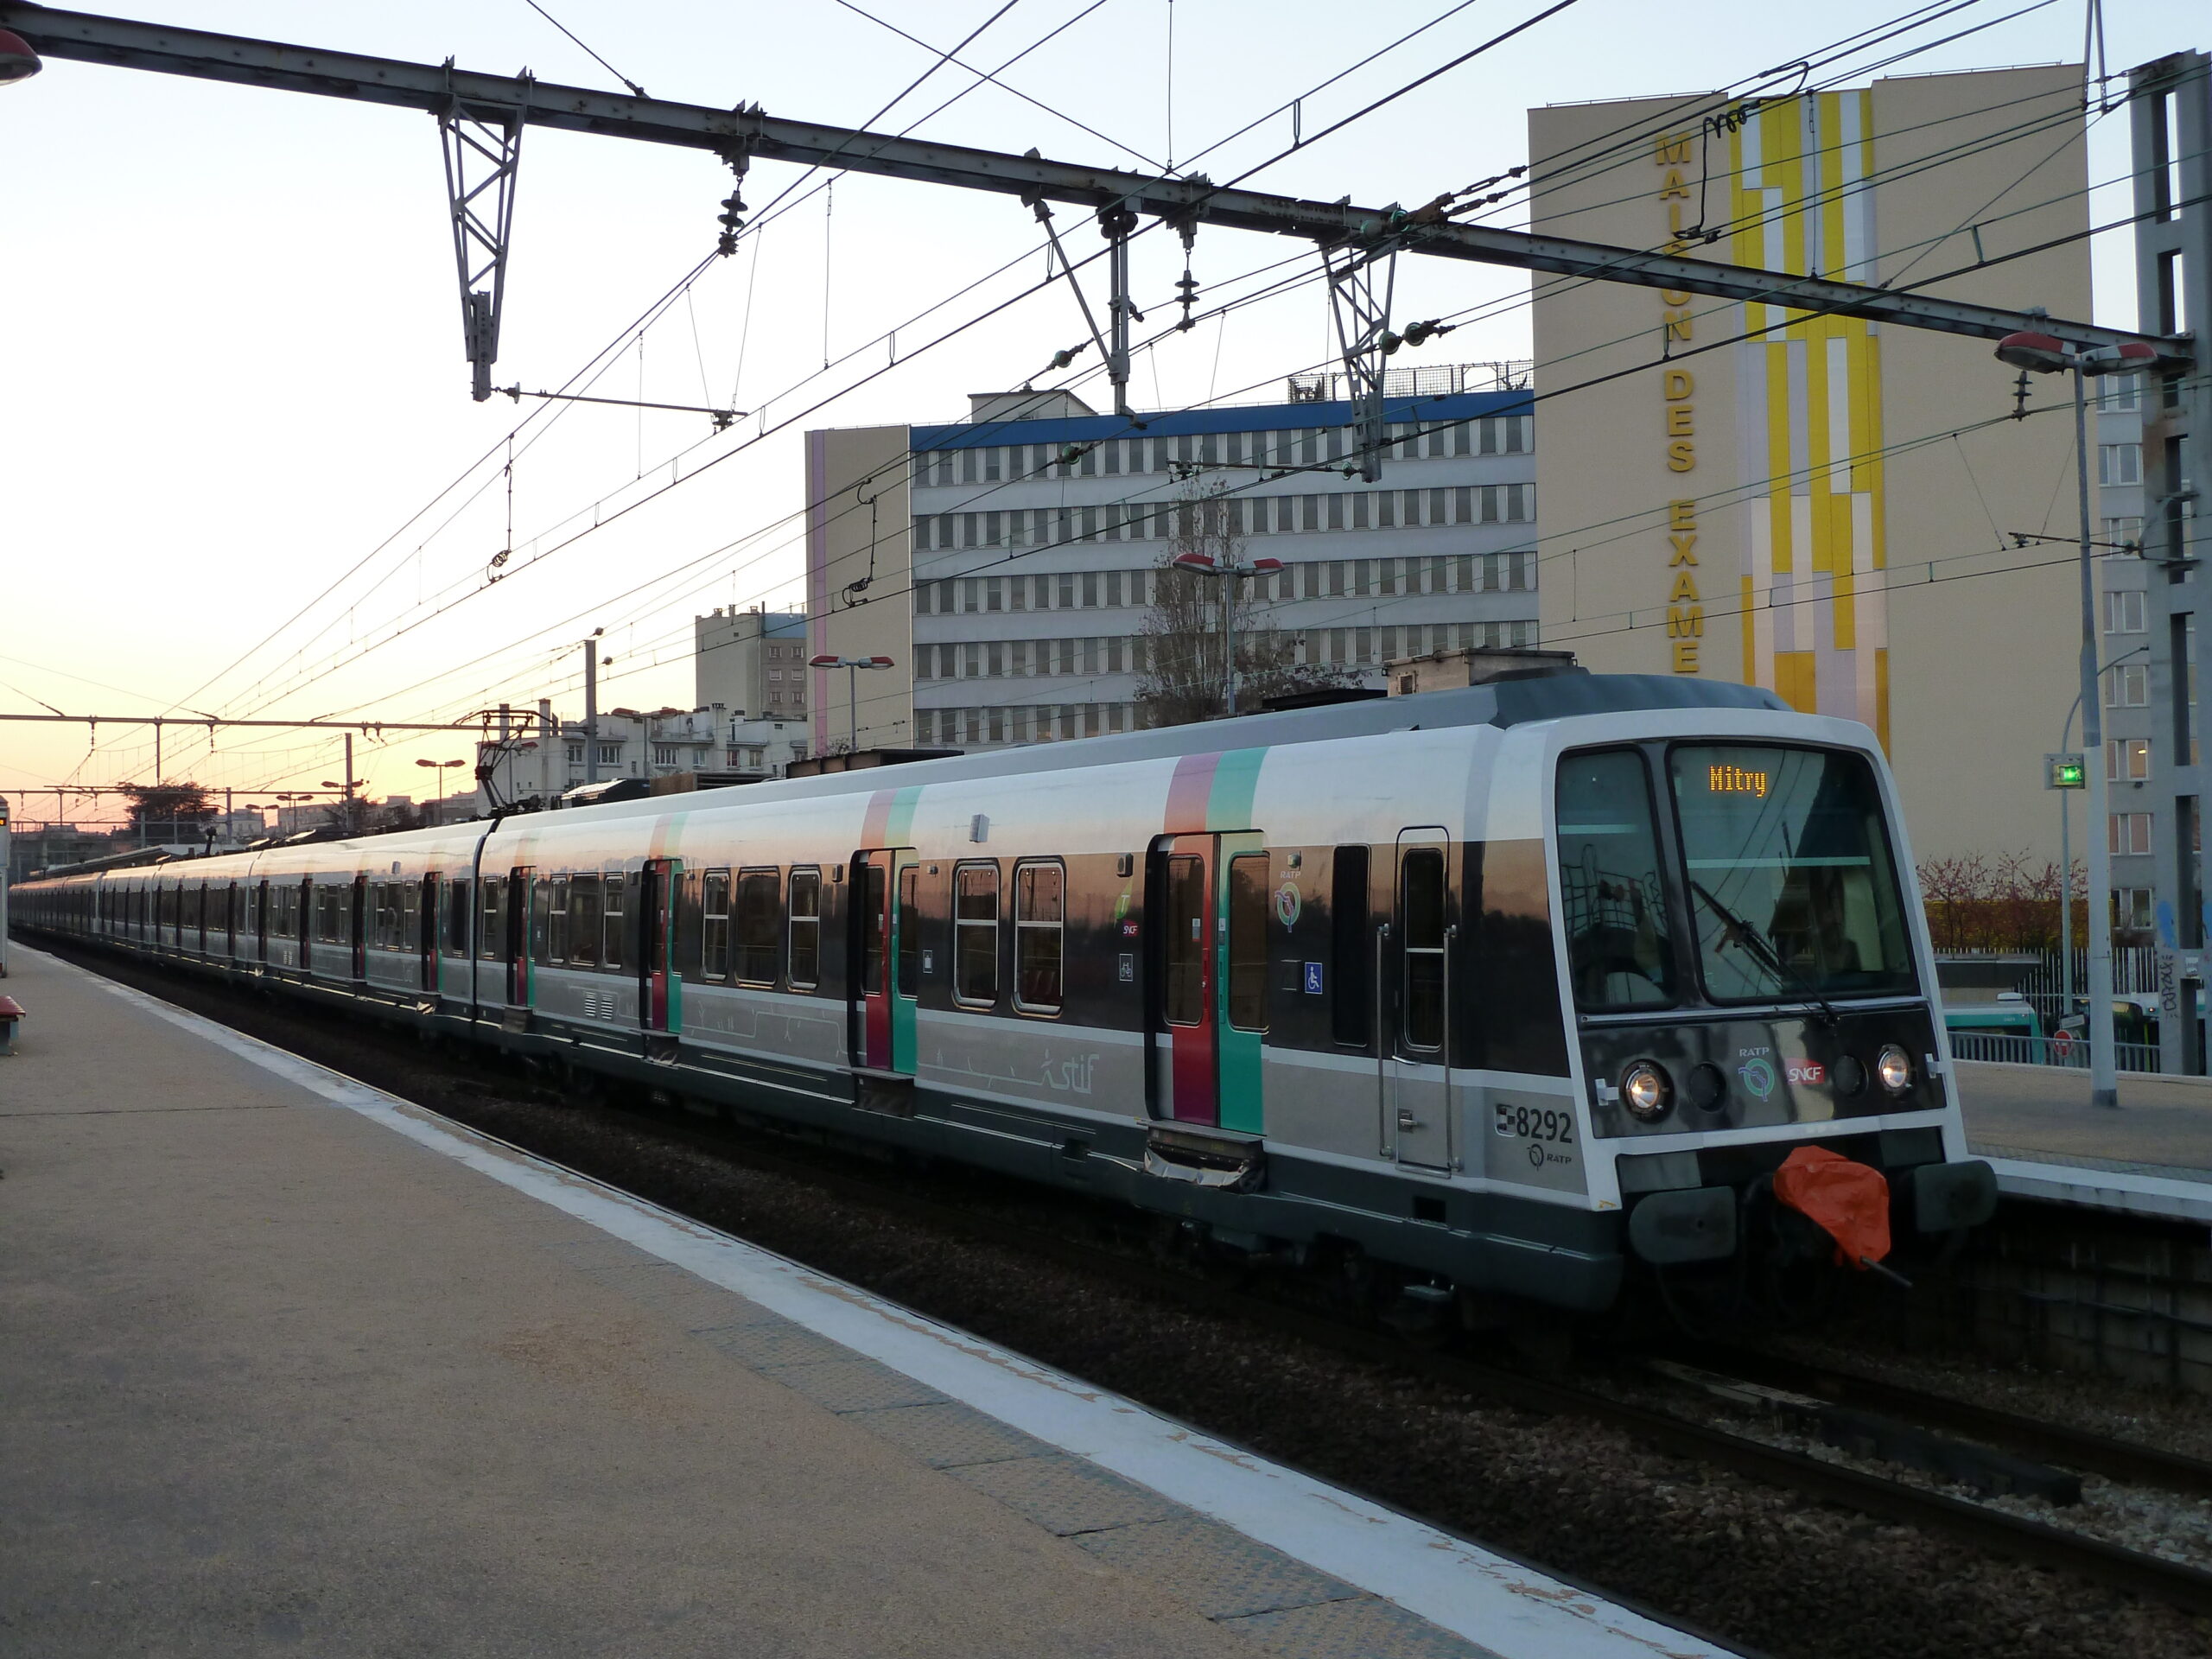 An MI 79 EMU - the rolling stock currently operating on Line B